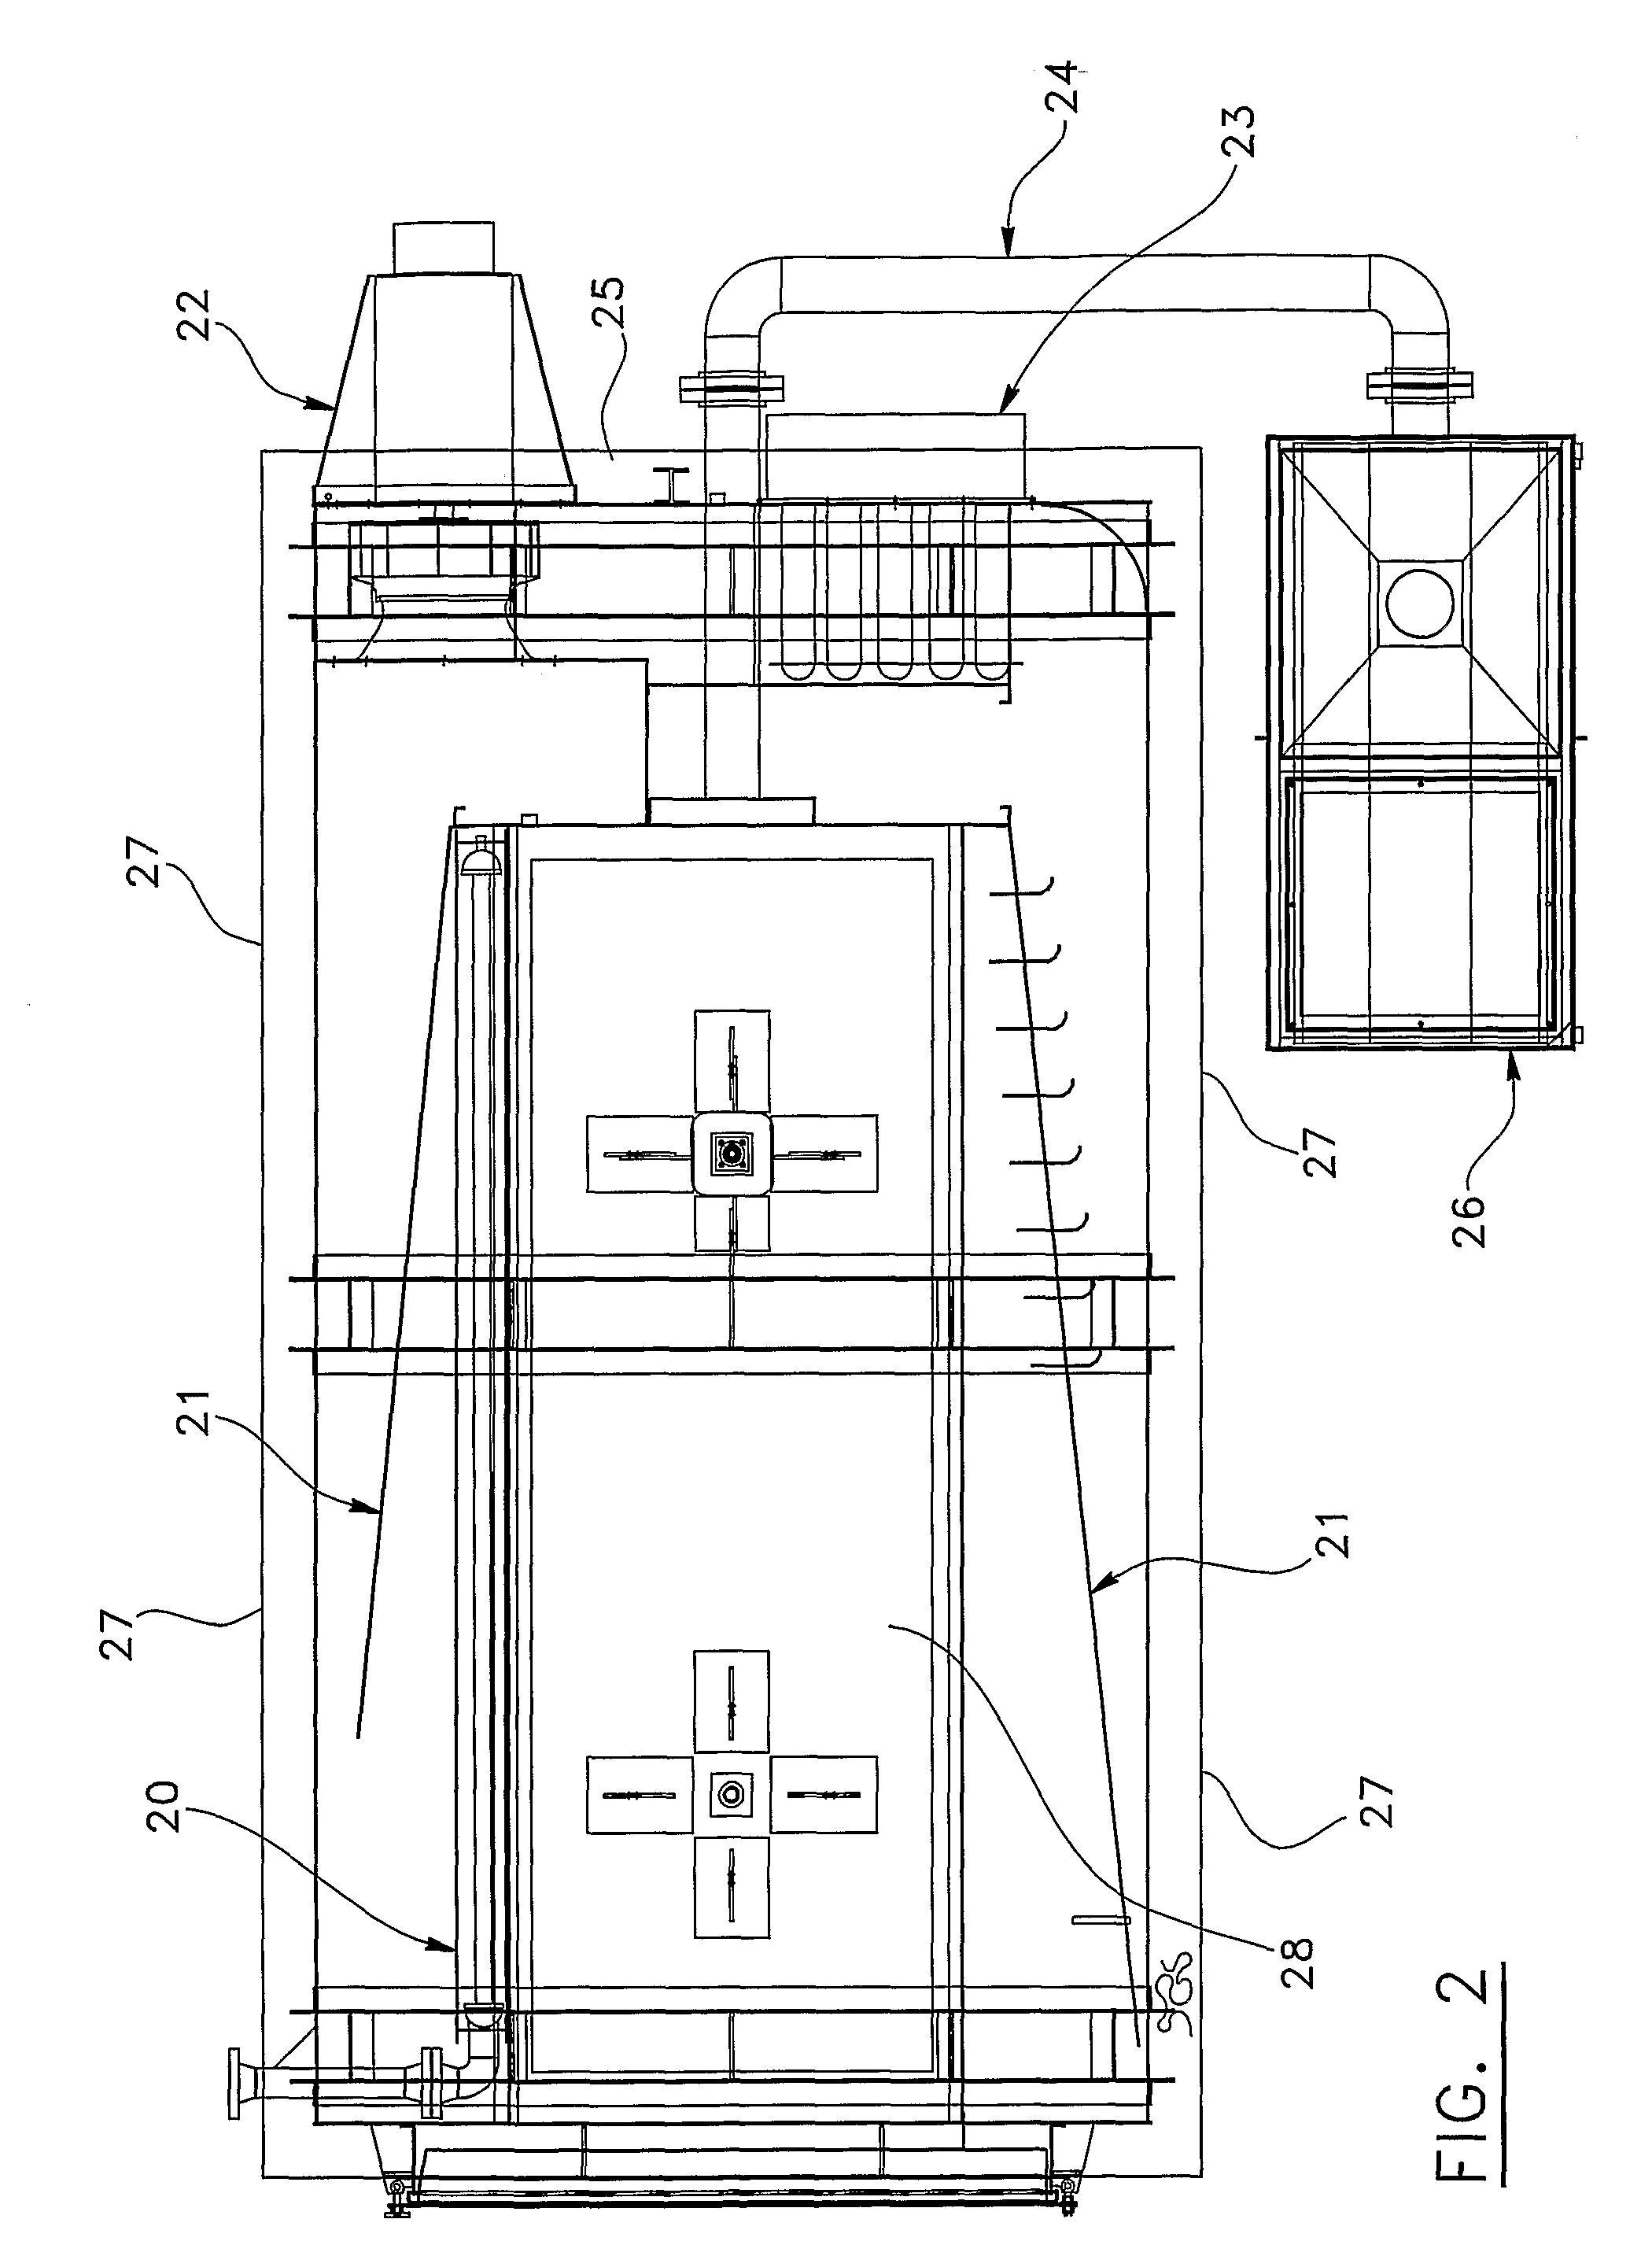 Process for treating lignocellulosic material, and apparatus for carrying out the same